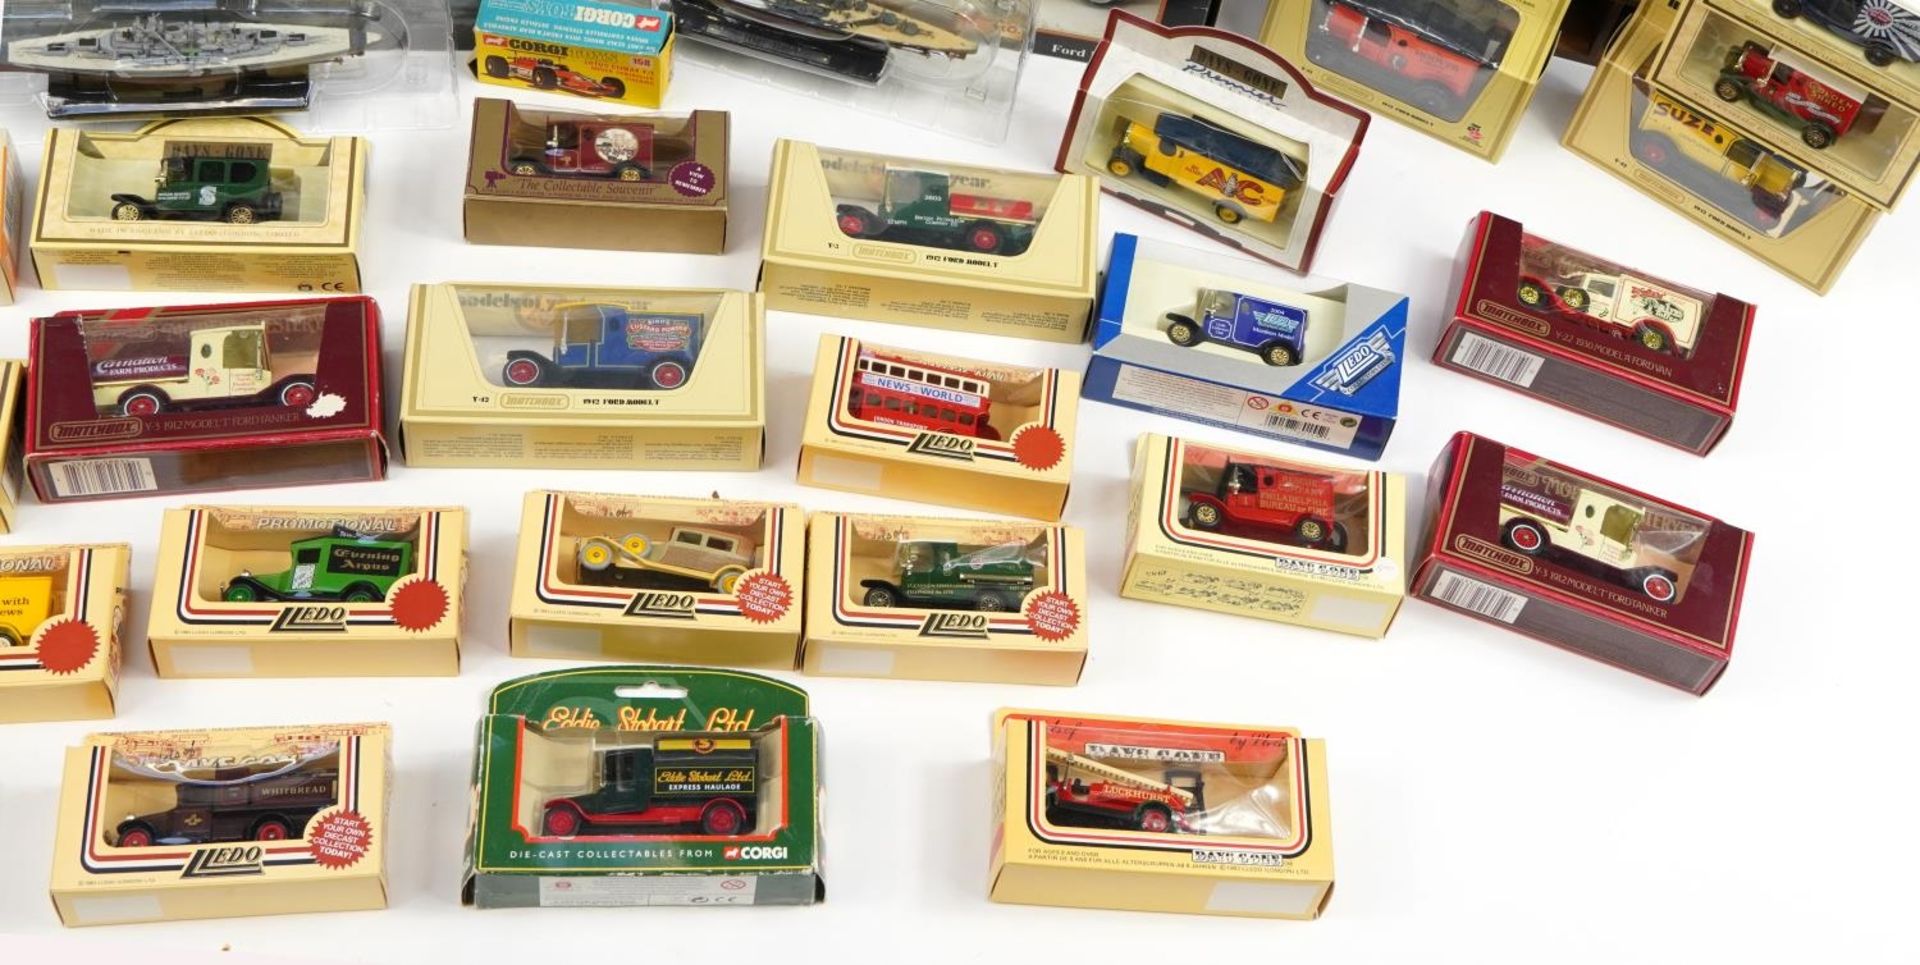 Collection of diecast advertising collector's vehicles and boats with boxes including Days Gone, - Image 6 of 6